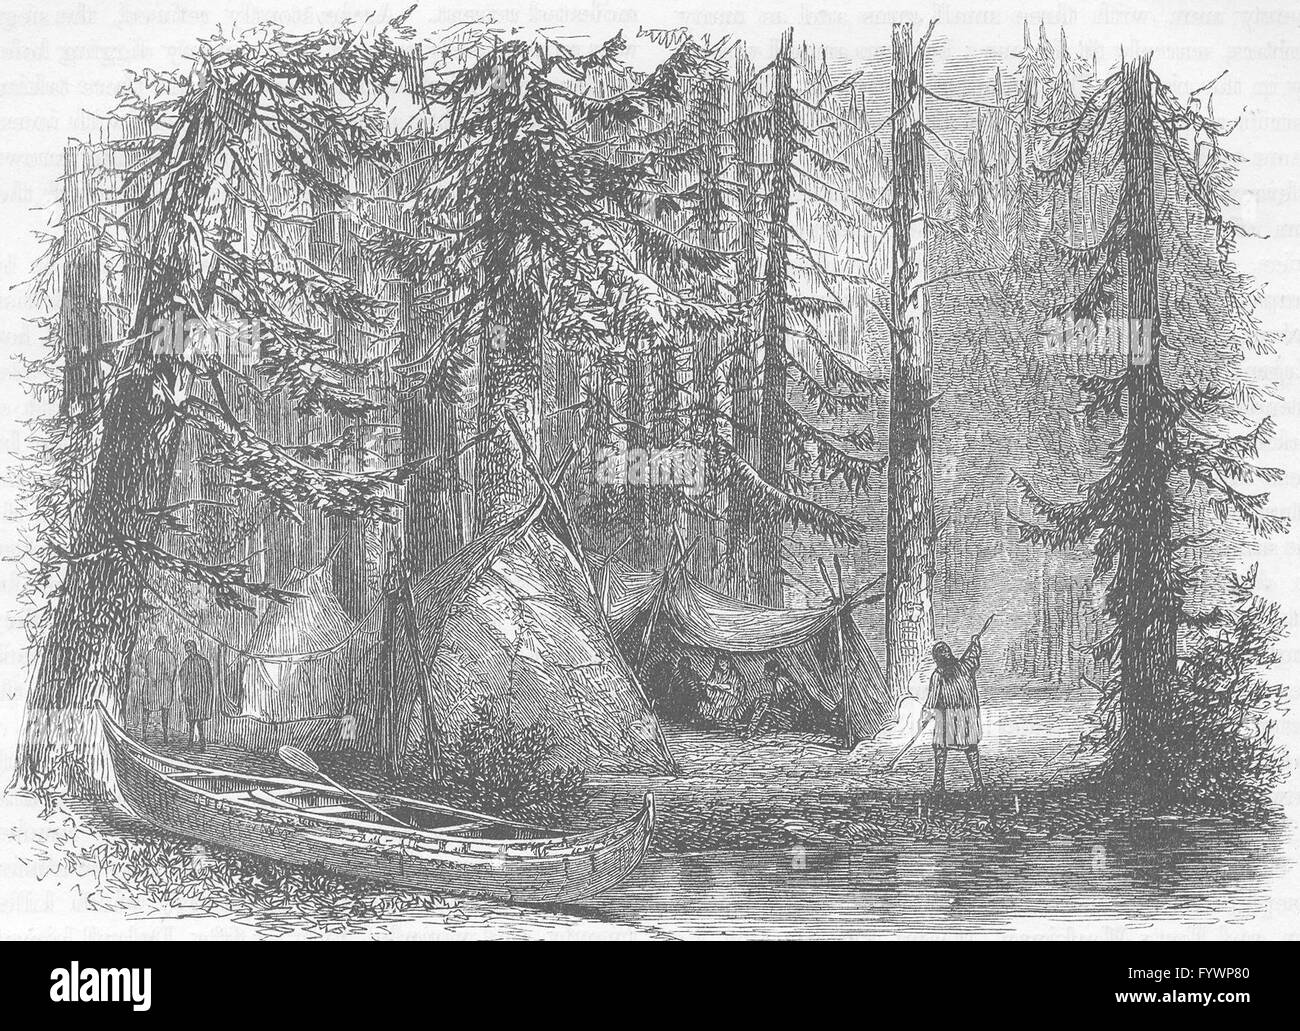 USA: Foresta Indiana & Lodges, antica stampa c1880 Foto Stock